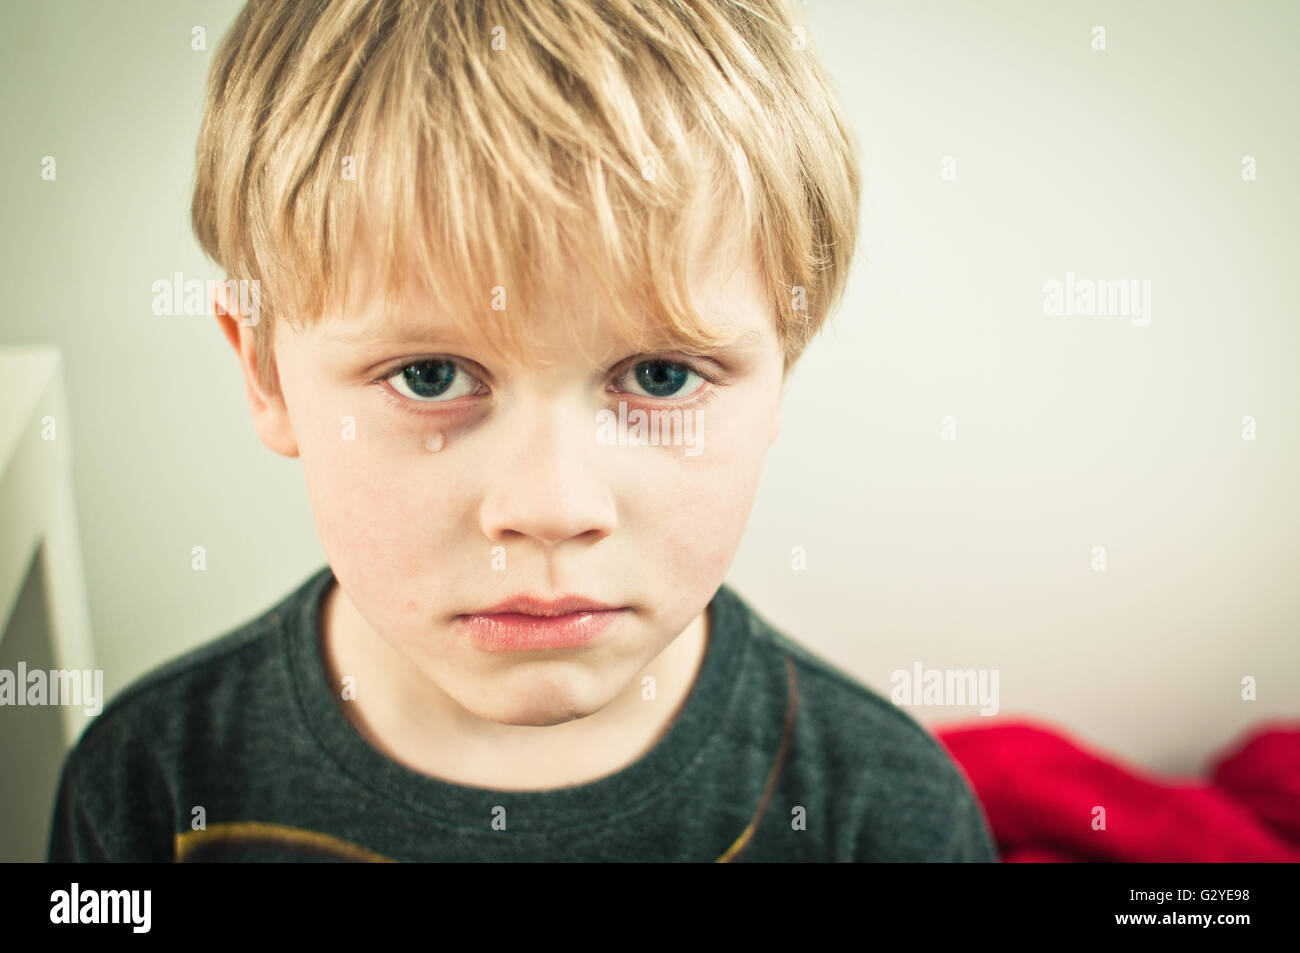 Lonely little boy with a sad face crying Stock Photo